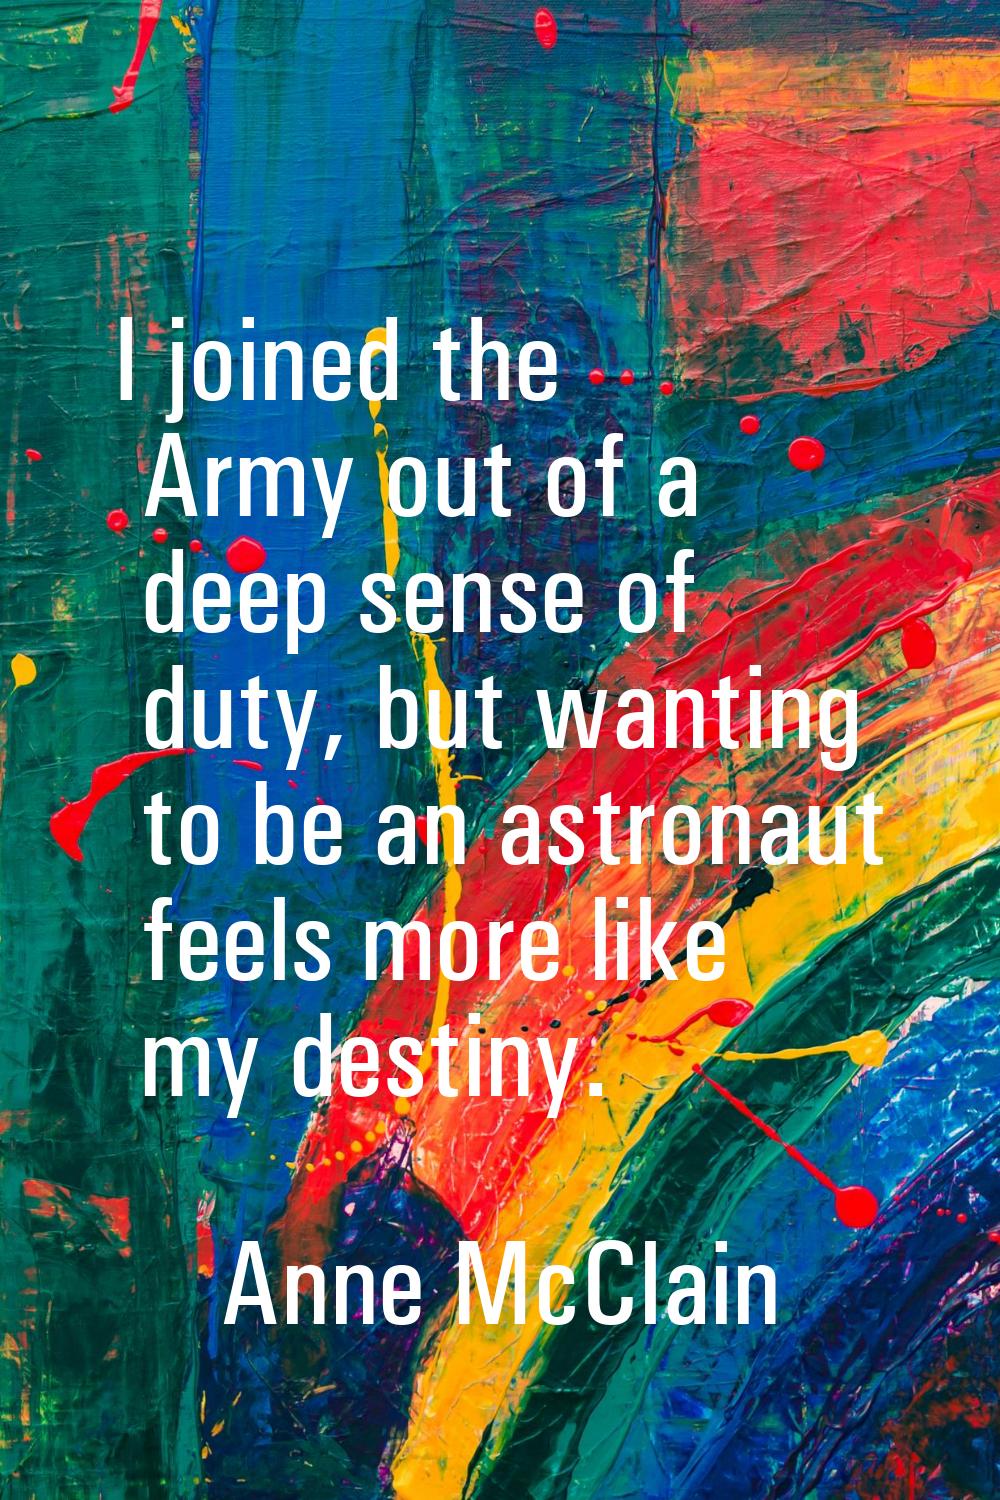 I joined the Army out of a deep sense of duty, but wanting to be an astronaut feels more like my de